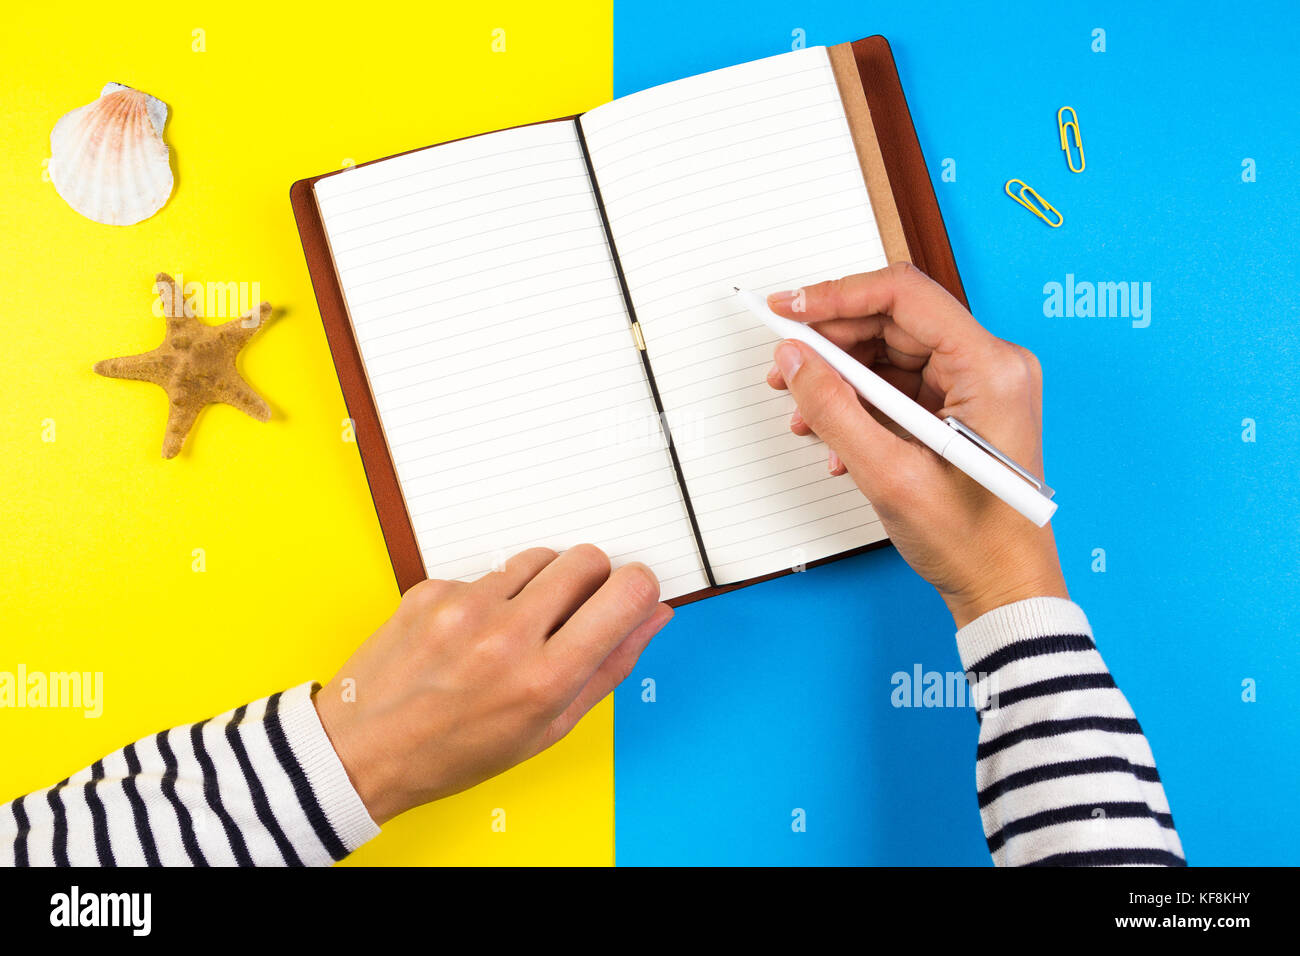 Woman hand writing in notebook over blue and yellow background Stock Photo